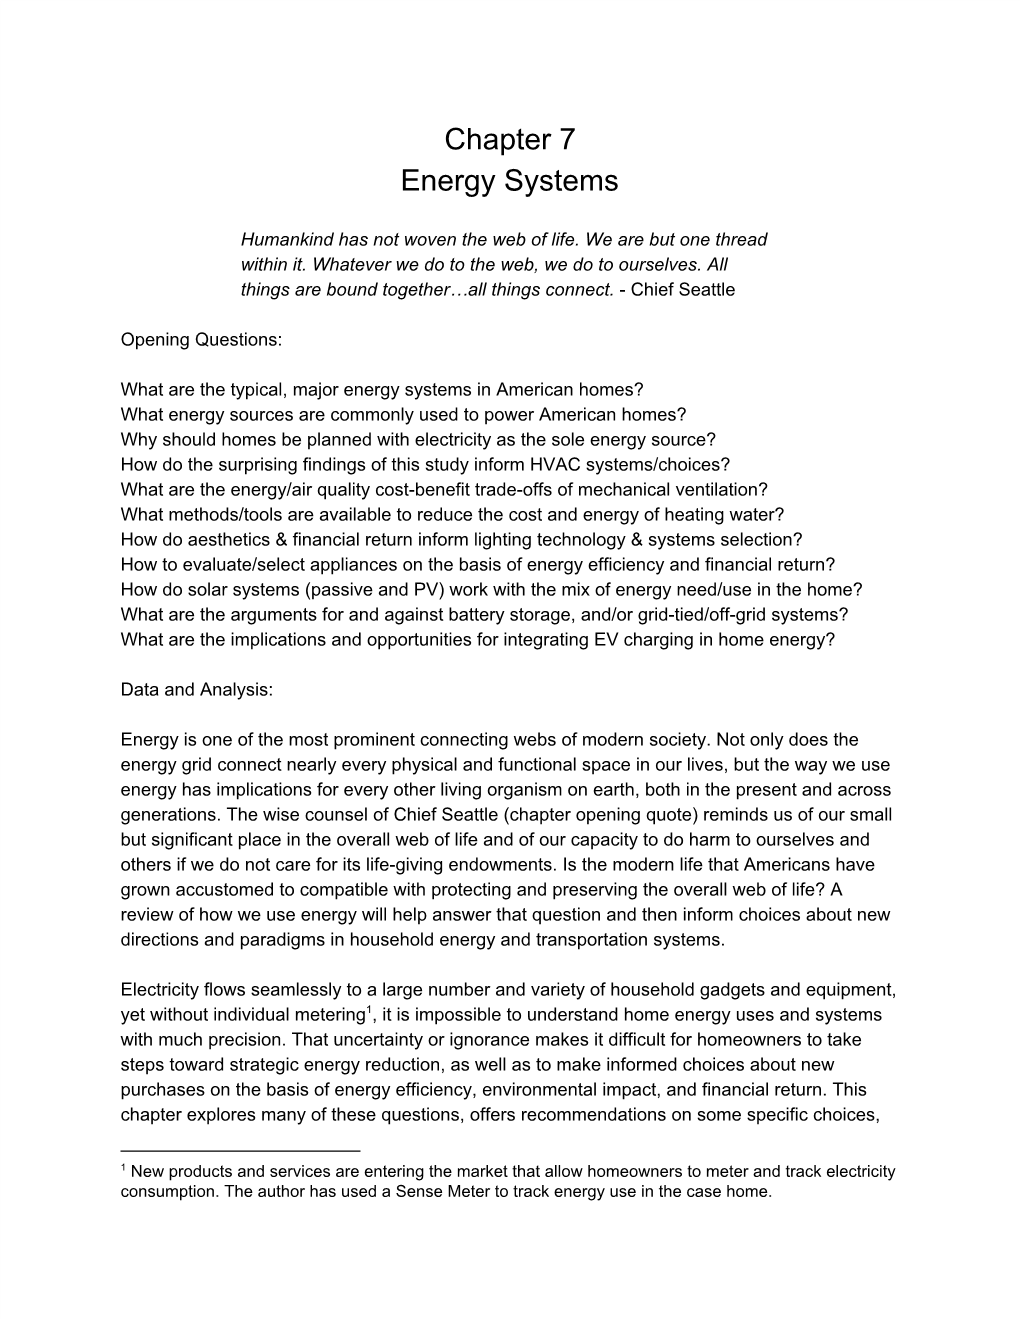 Chapter 7 Energy Systems